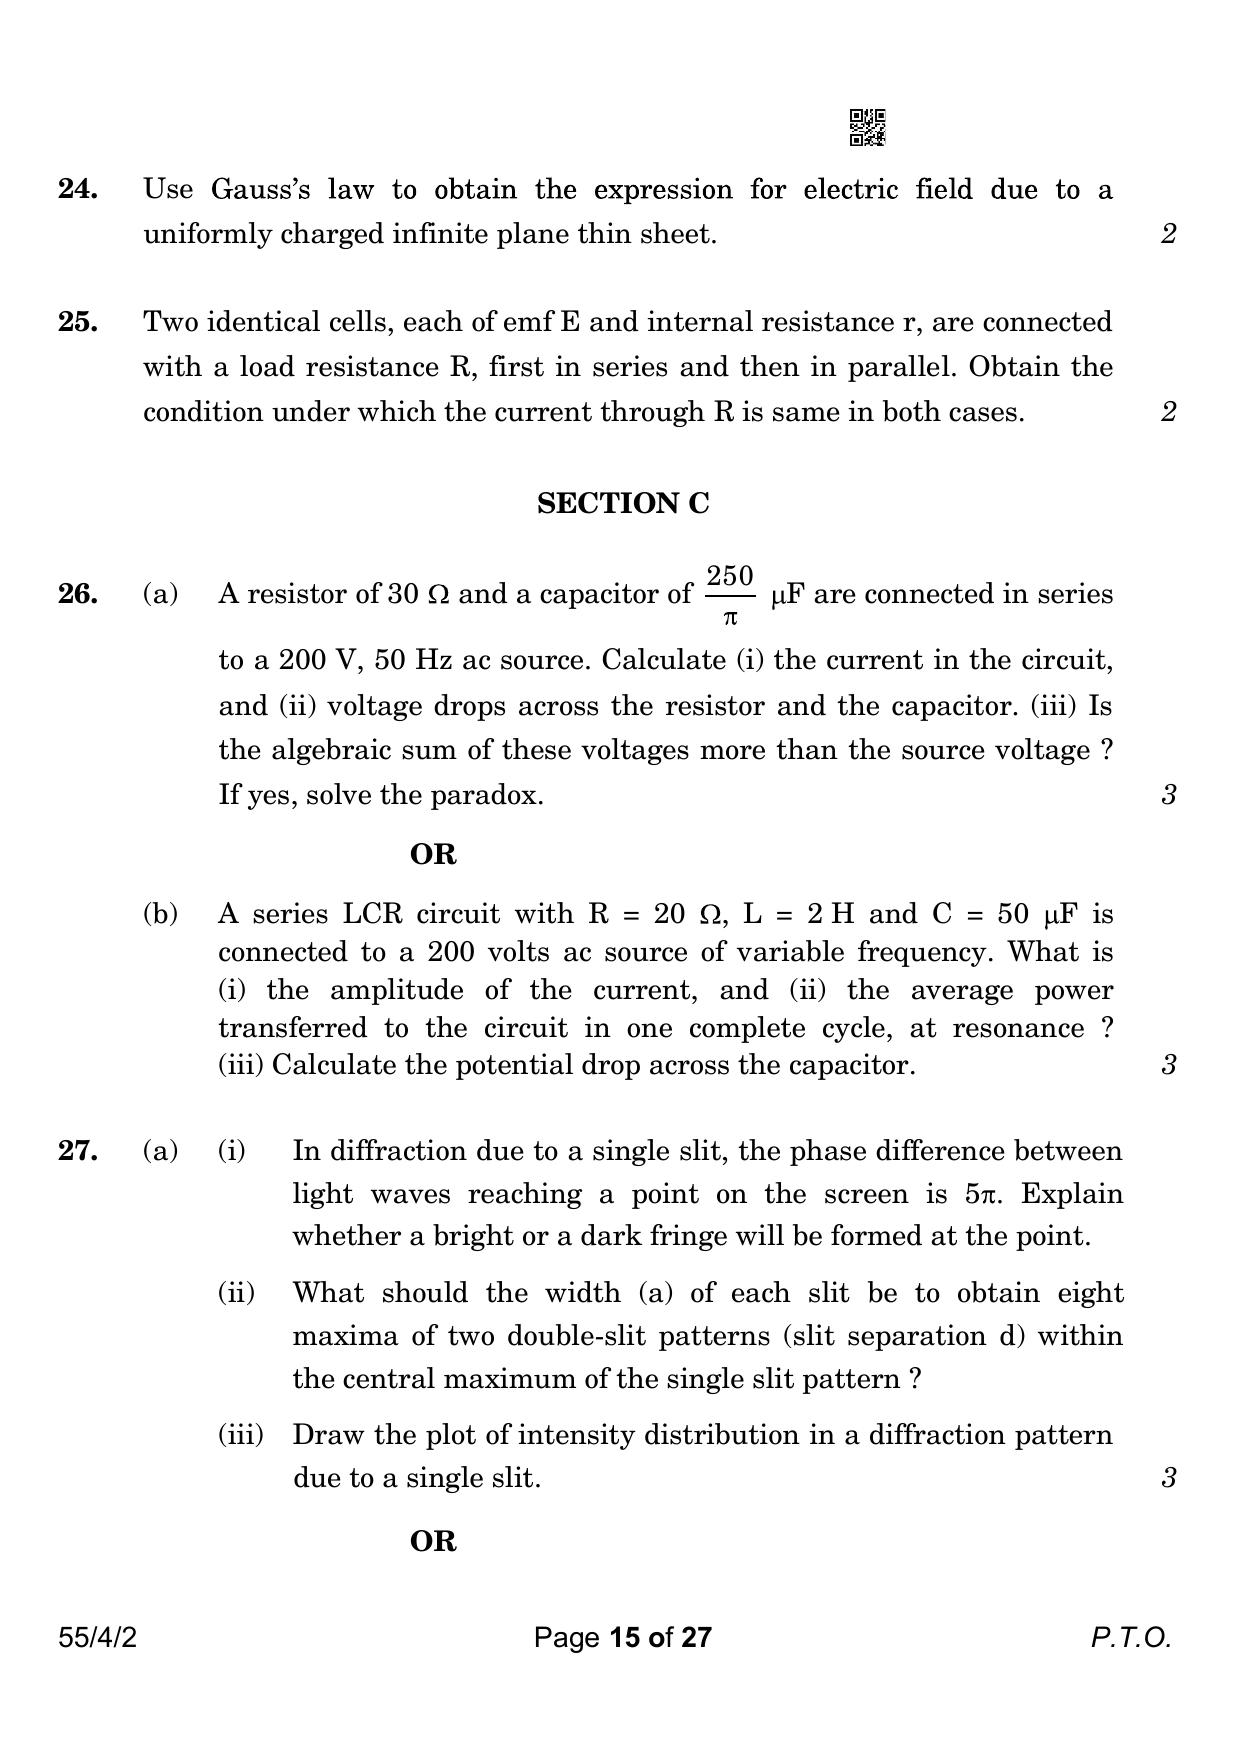 CBSE Class 12 55-4-2 Physics 2023 Question Paper - Page 15